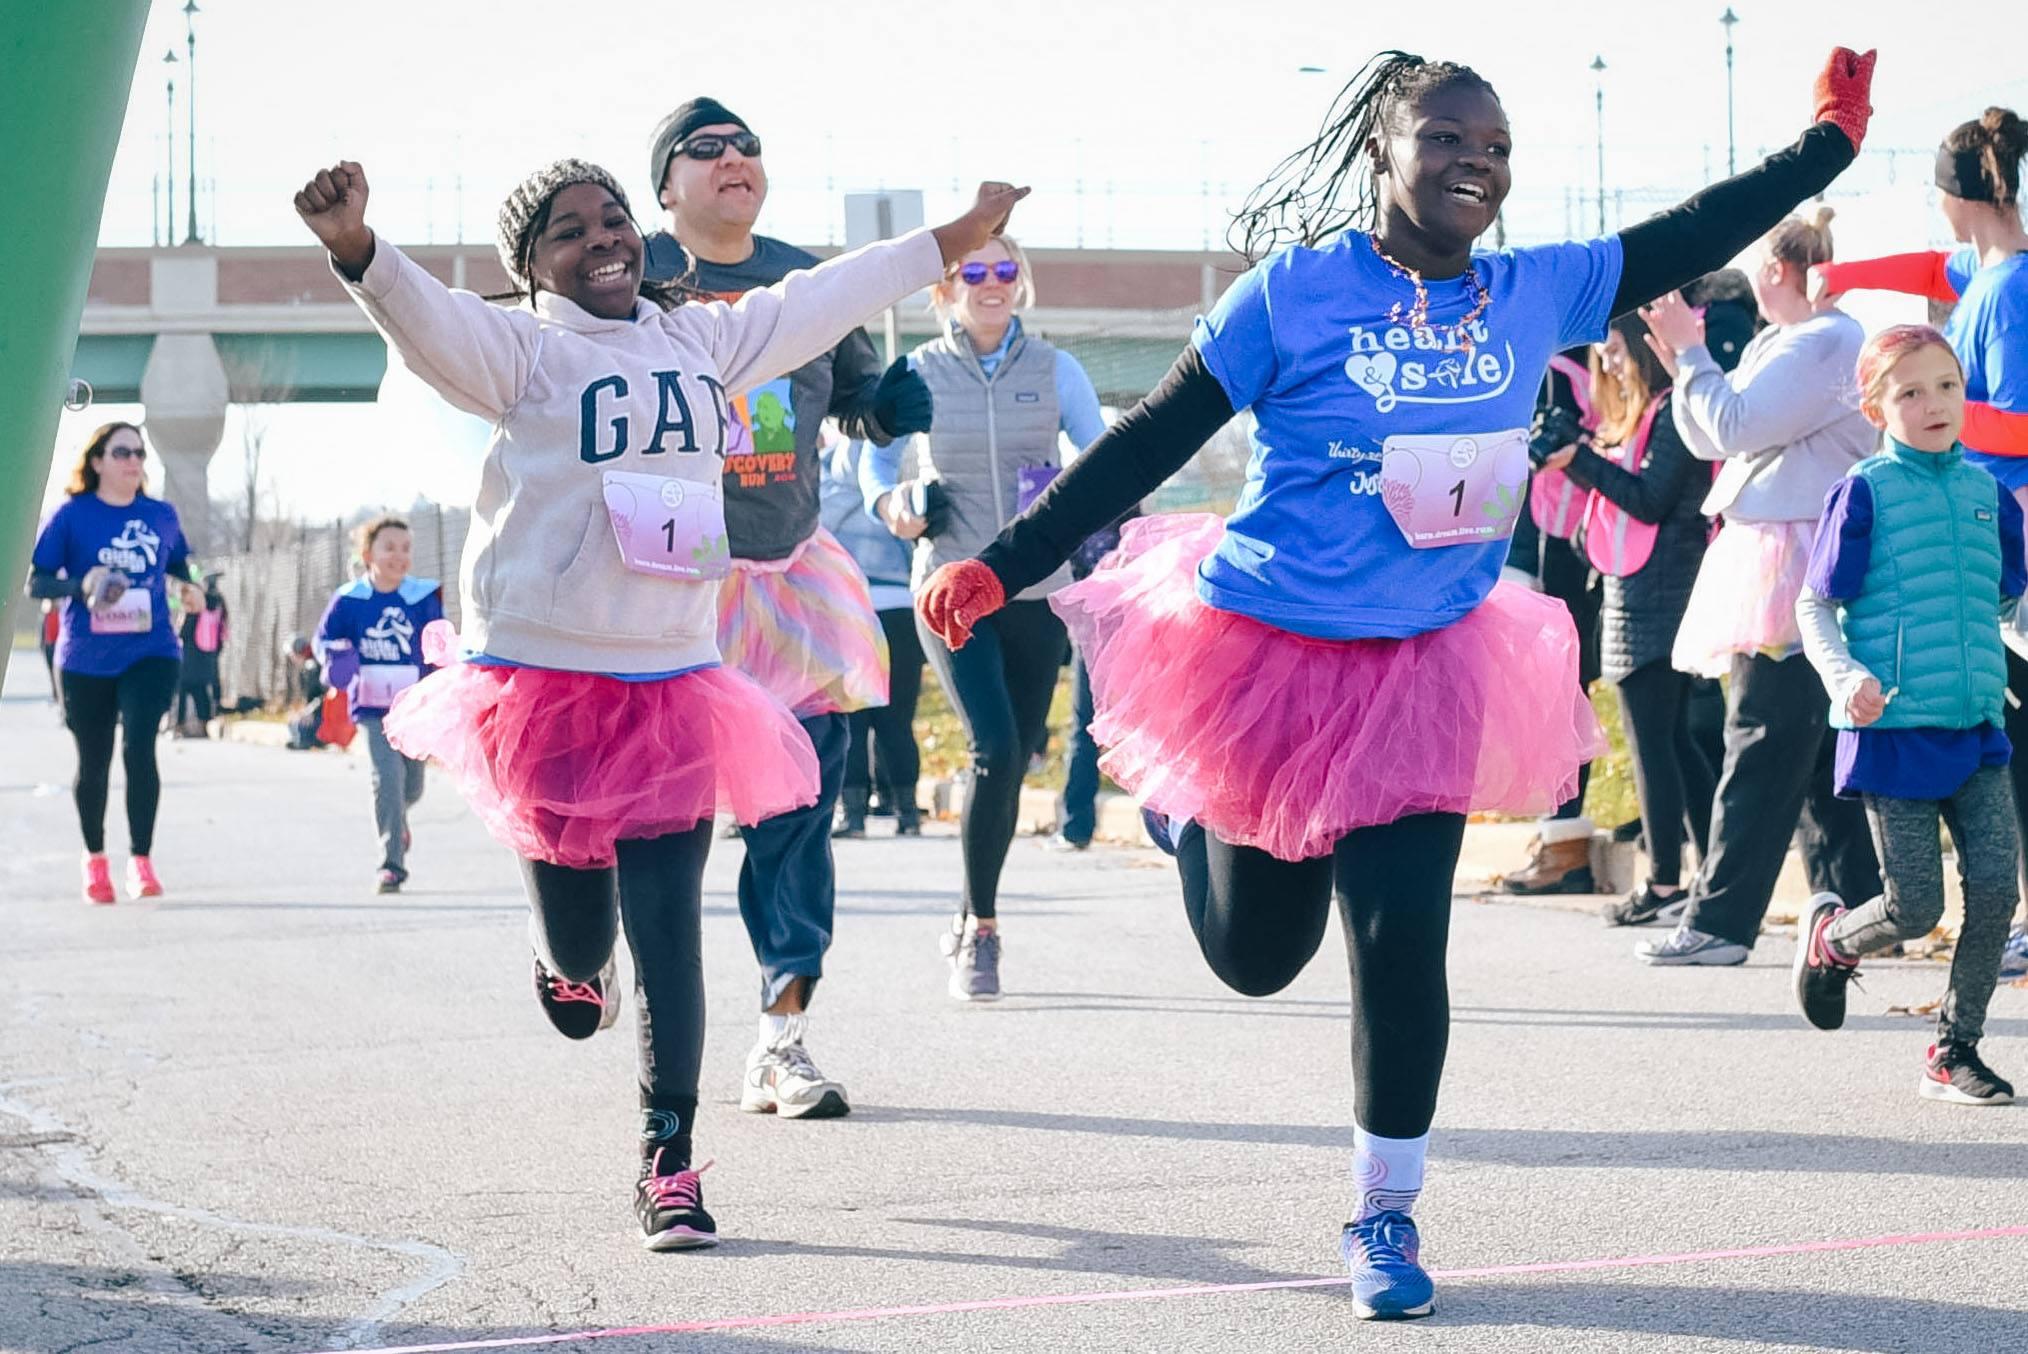 Study Shows Girls On The Run Helps Participants Beyond the Curriculum